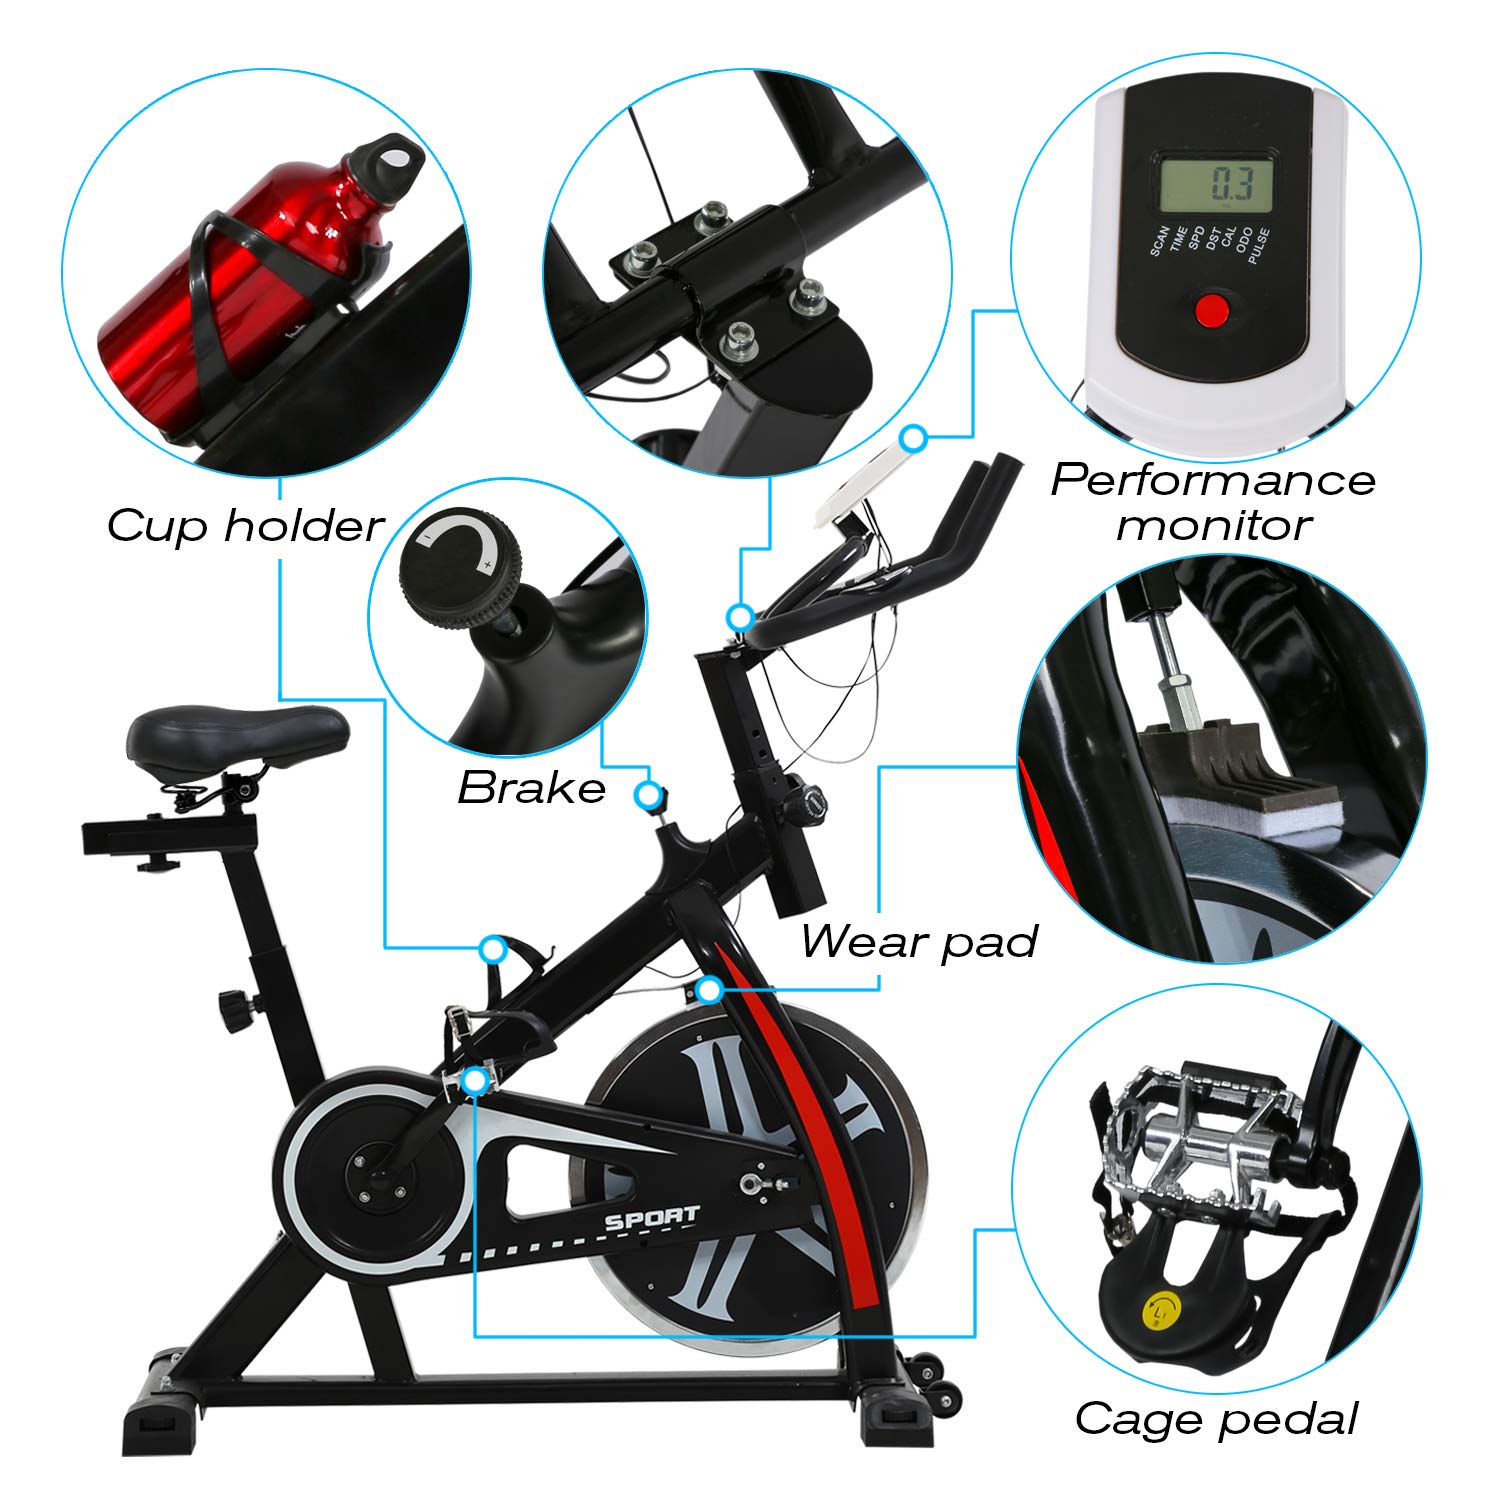 How to Choose the Best Stationary Exercise Bike for Your Home Gym